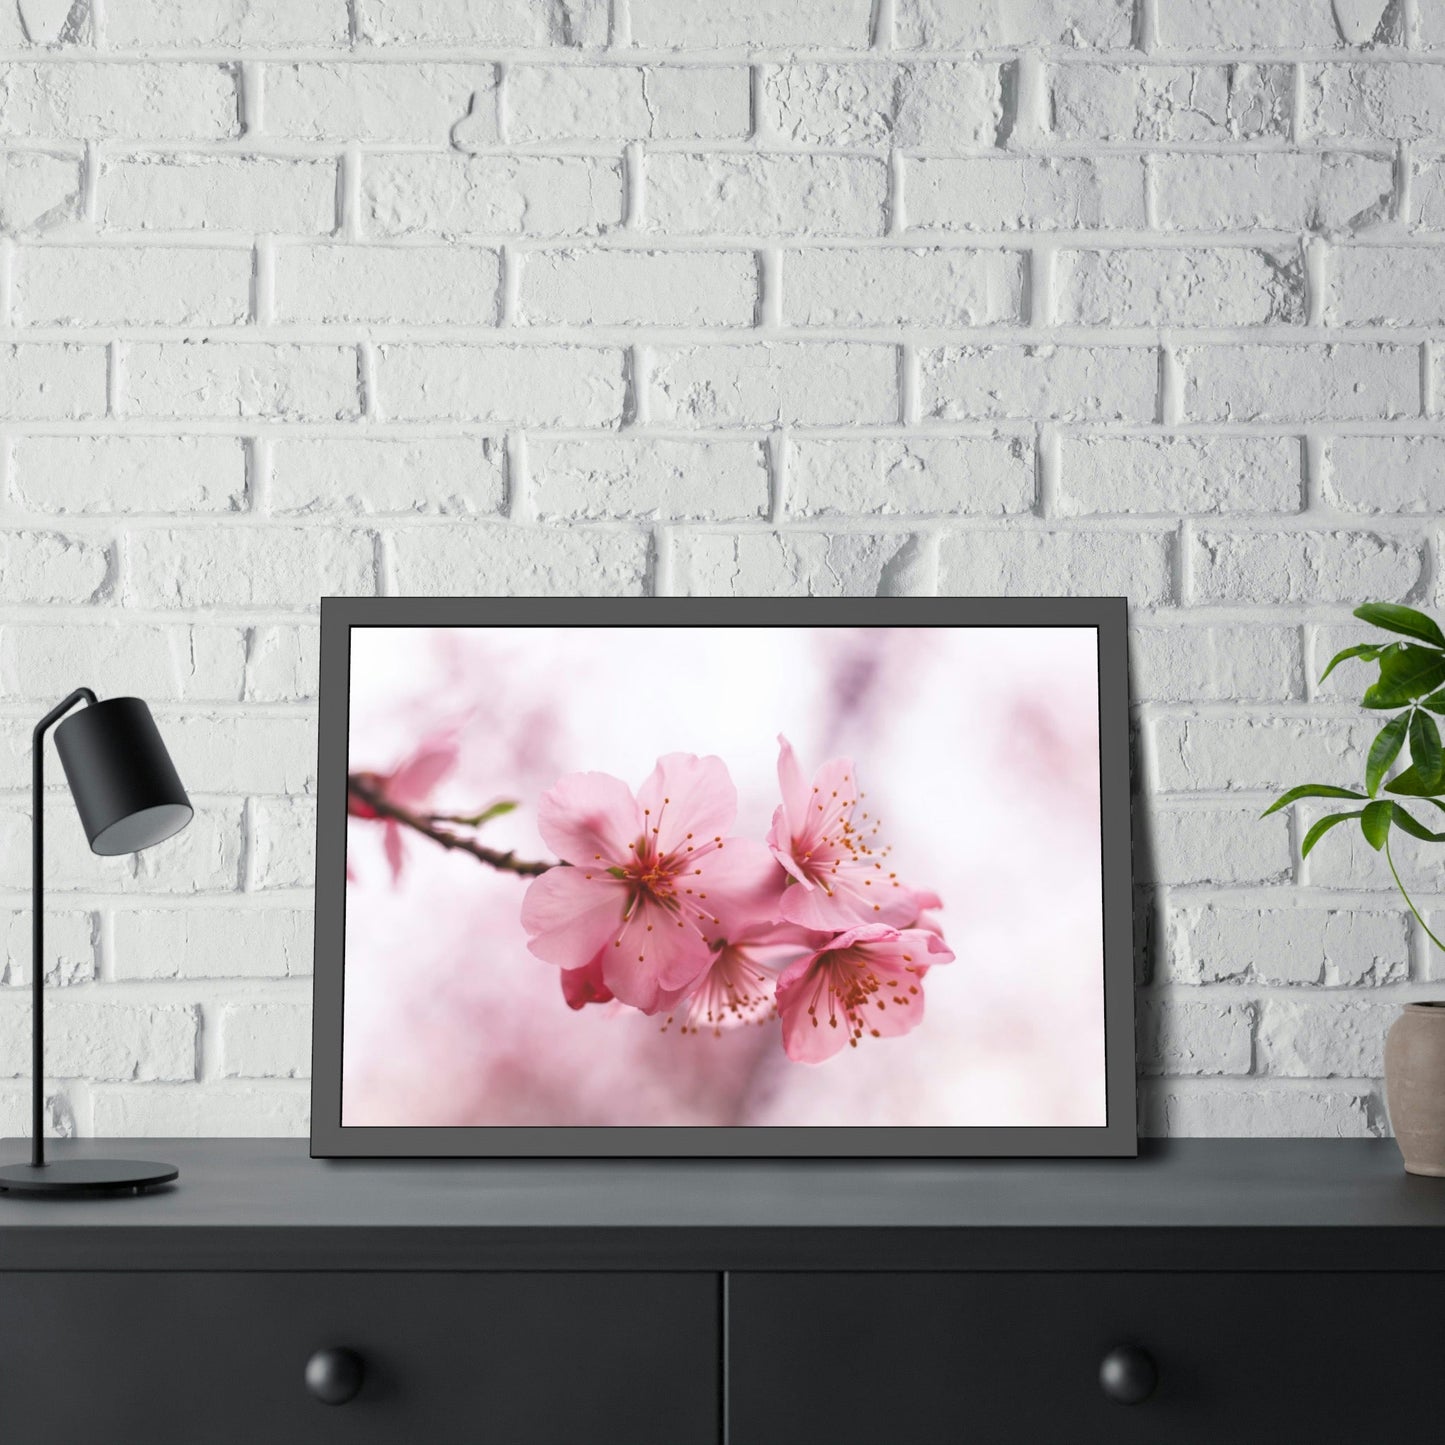 Japanese Garden: Cherry Blossoms on Natural Canvas